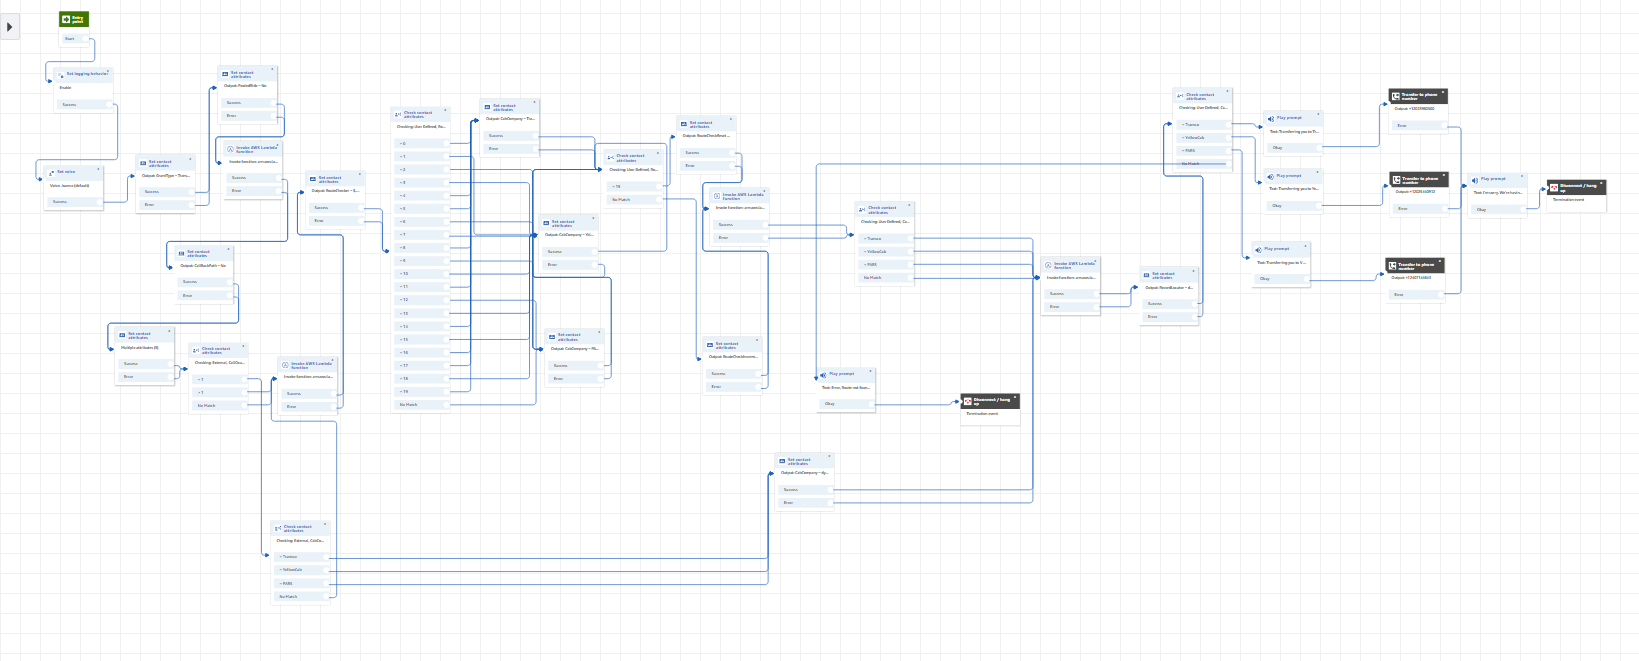 complex_call_flow.png